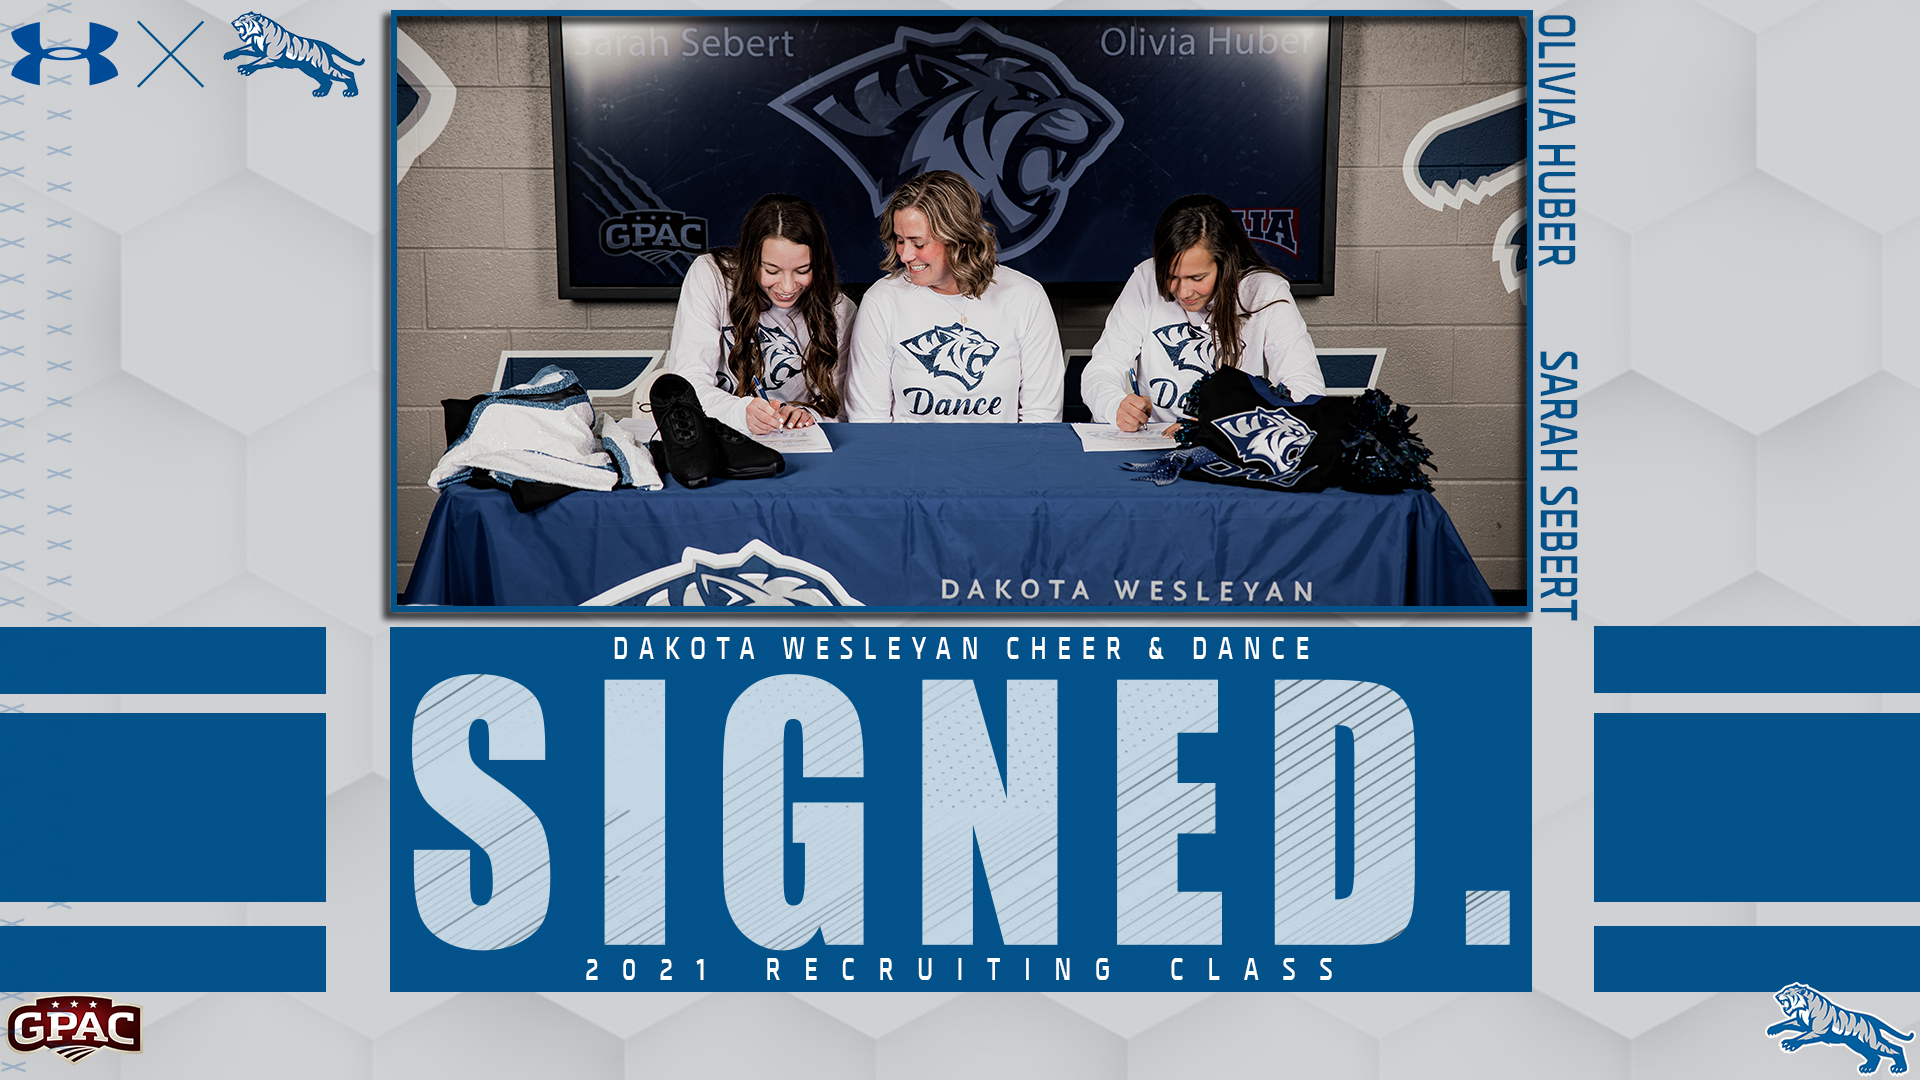 DWU CHEER AND DANCE TEAM SIGNS TWO STUDENT-ATHLETES FOR FIRST-EVER COMPETITIVE TEAM